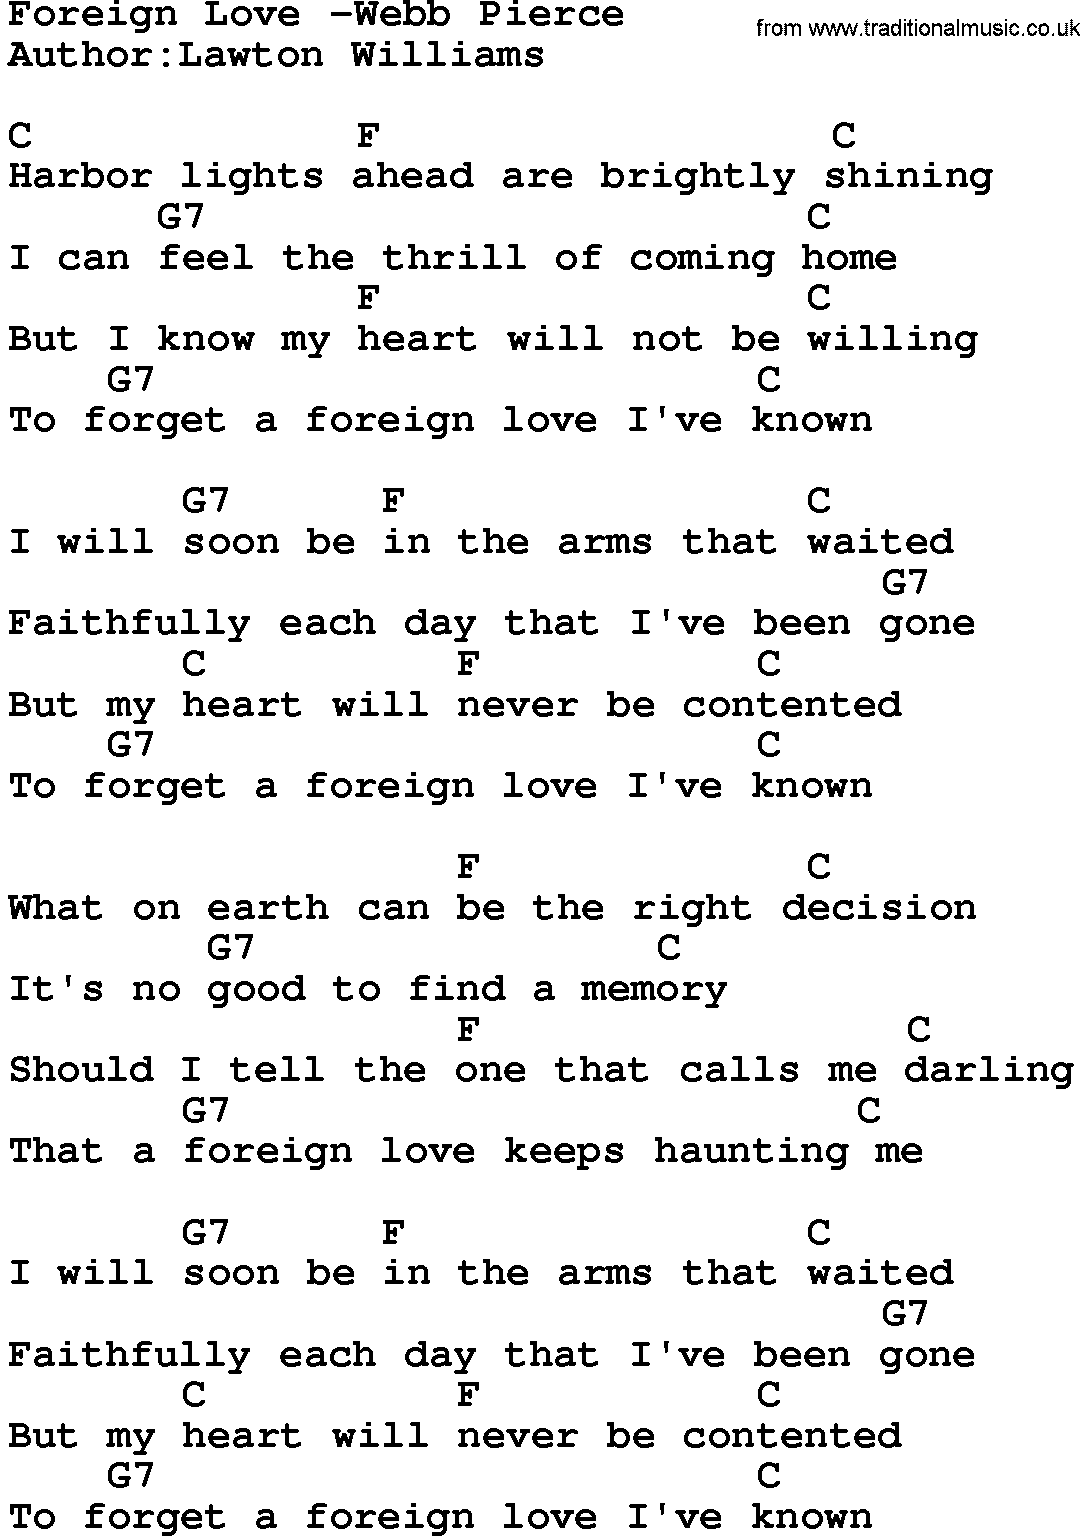 Country music song: Foreign Love -Webb Pierce lyrics and chords